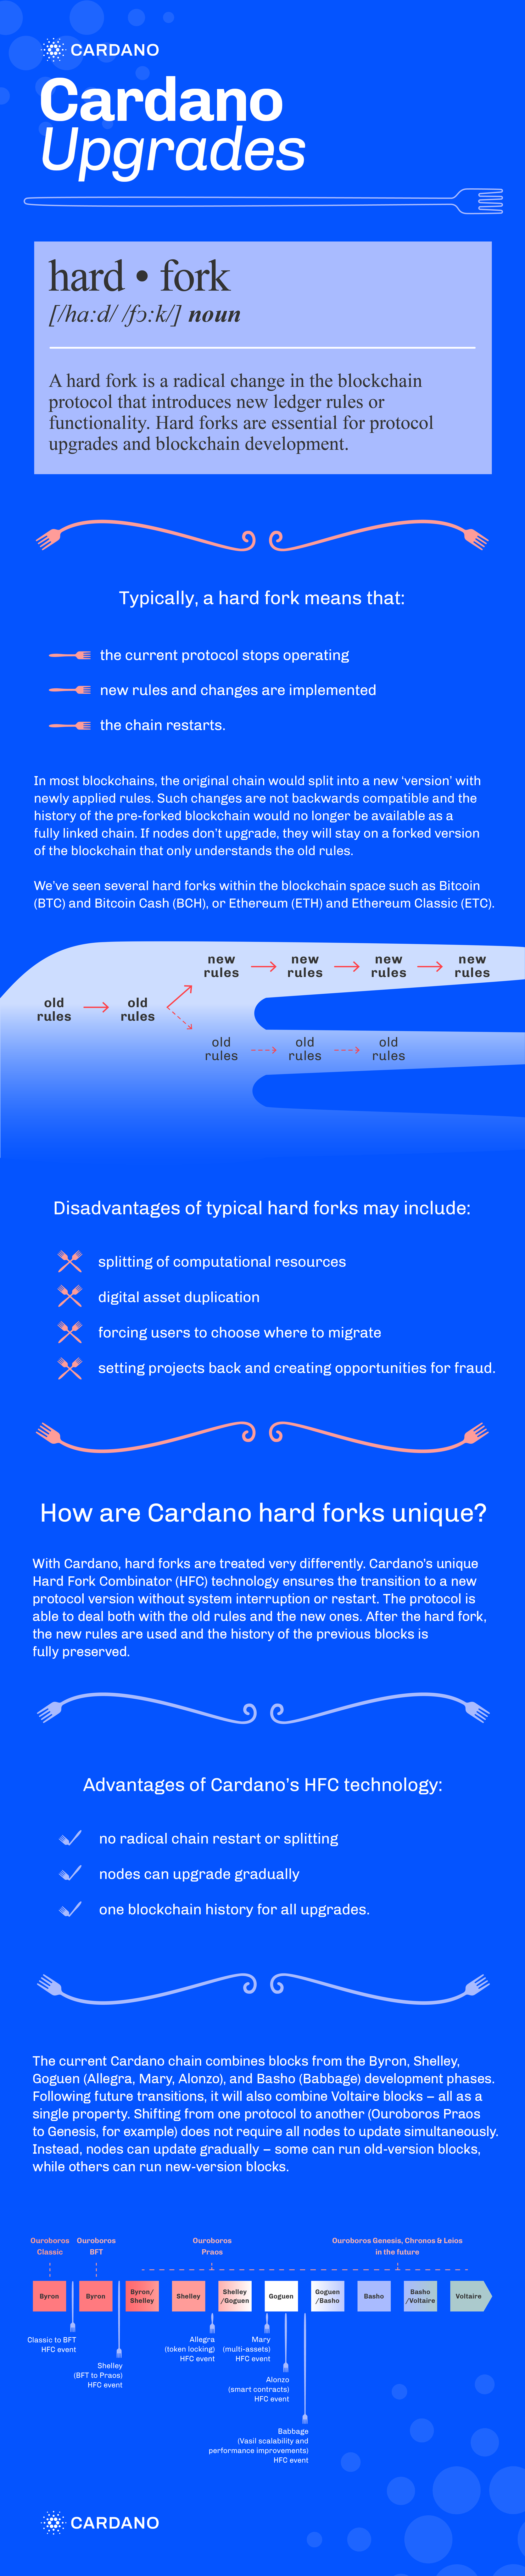 Cardano upgrades: when is a hard fork not a hard fork